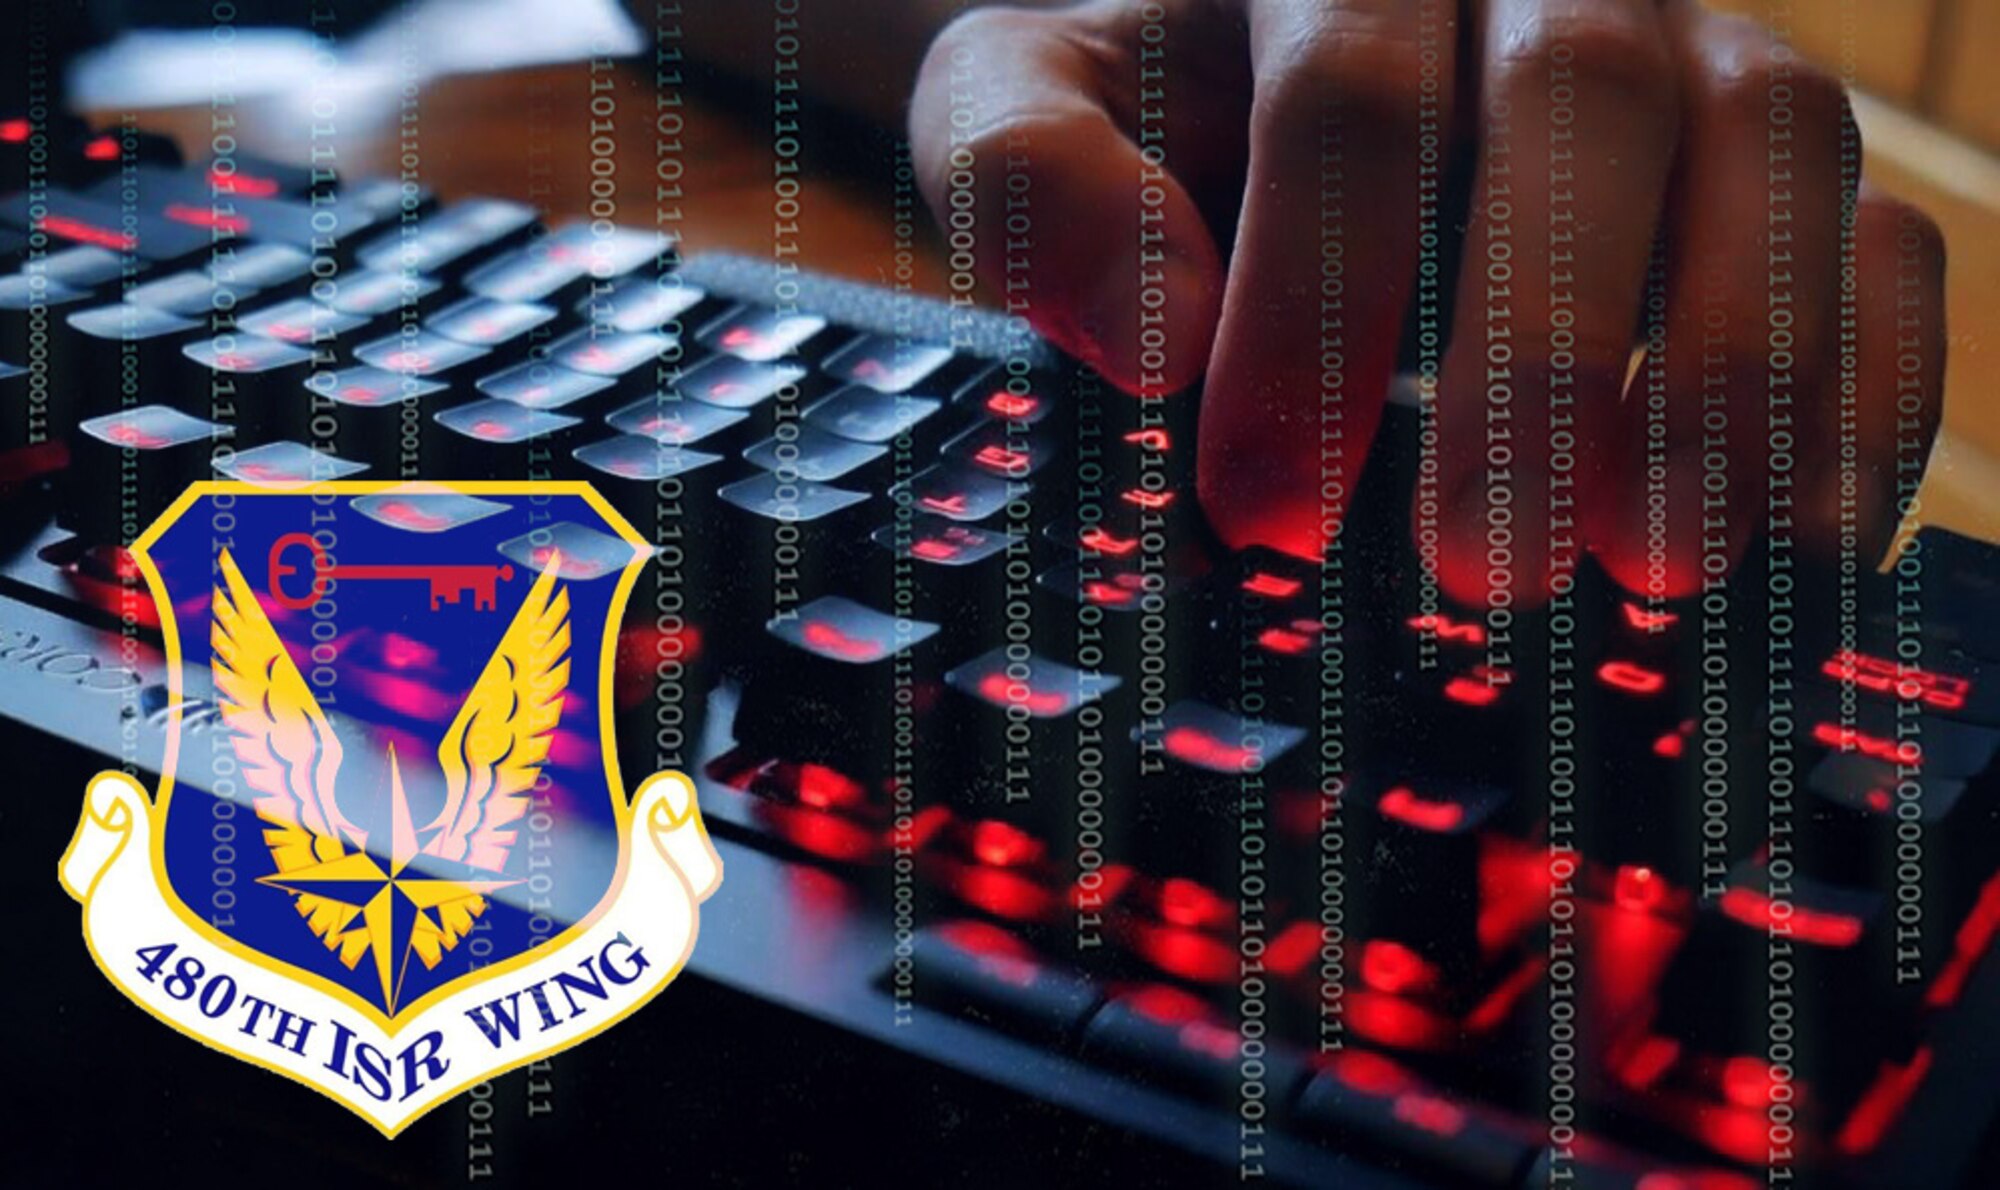 The 497th Intelligence, Reconnaissance and Surveillance Group has implemented a Software Development Team to drive mission success at Joint Base Langley-Eustis, Virginia. The SDT creates software solutions for in-house problems analysts face, and is staffed by a mixture of Airmen from various Air Force Specialty Codes throughout the group. (U.S. Air Force graphic by Alexx Pons)